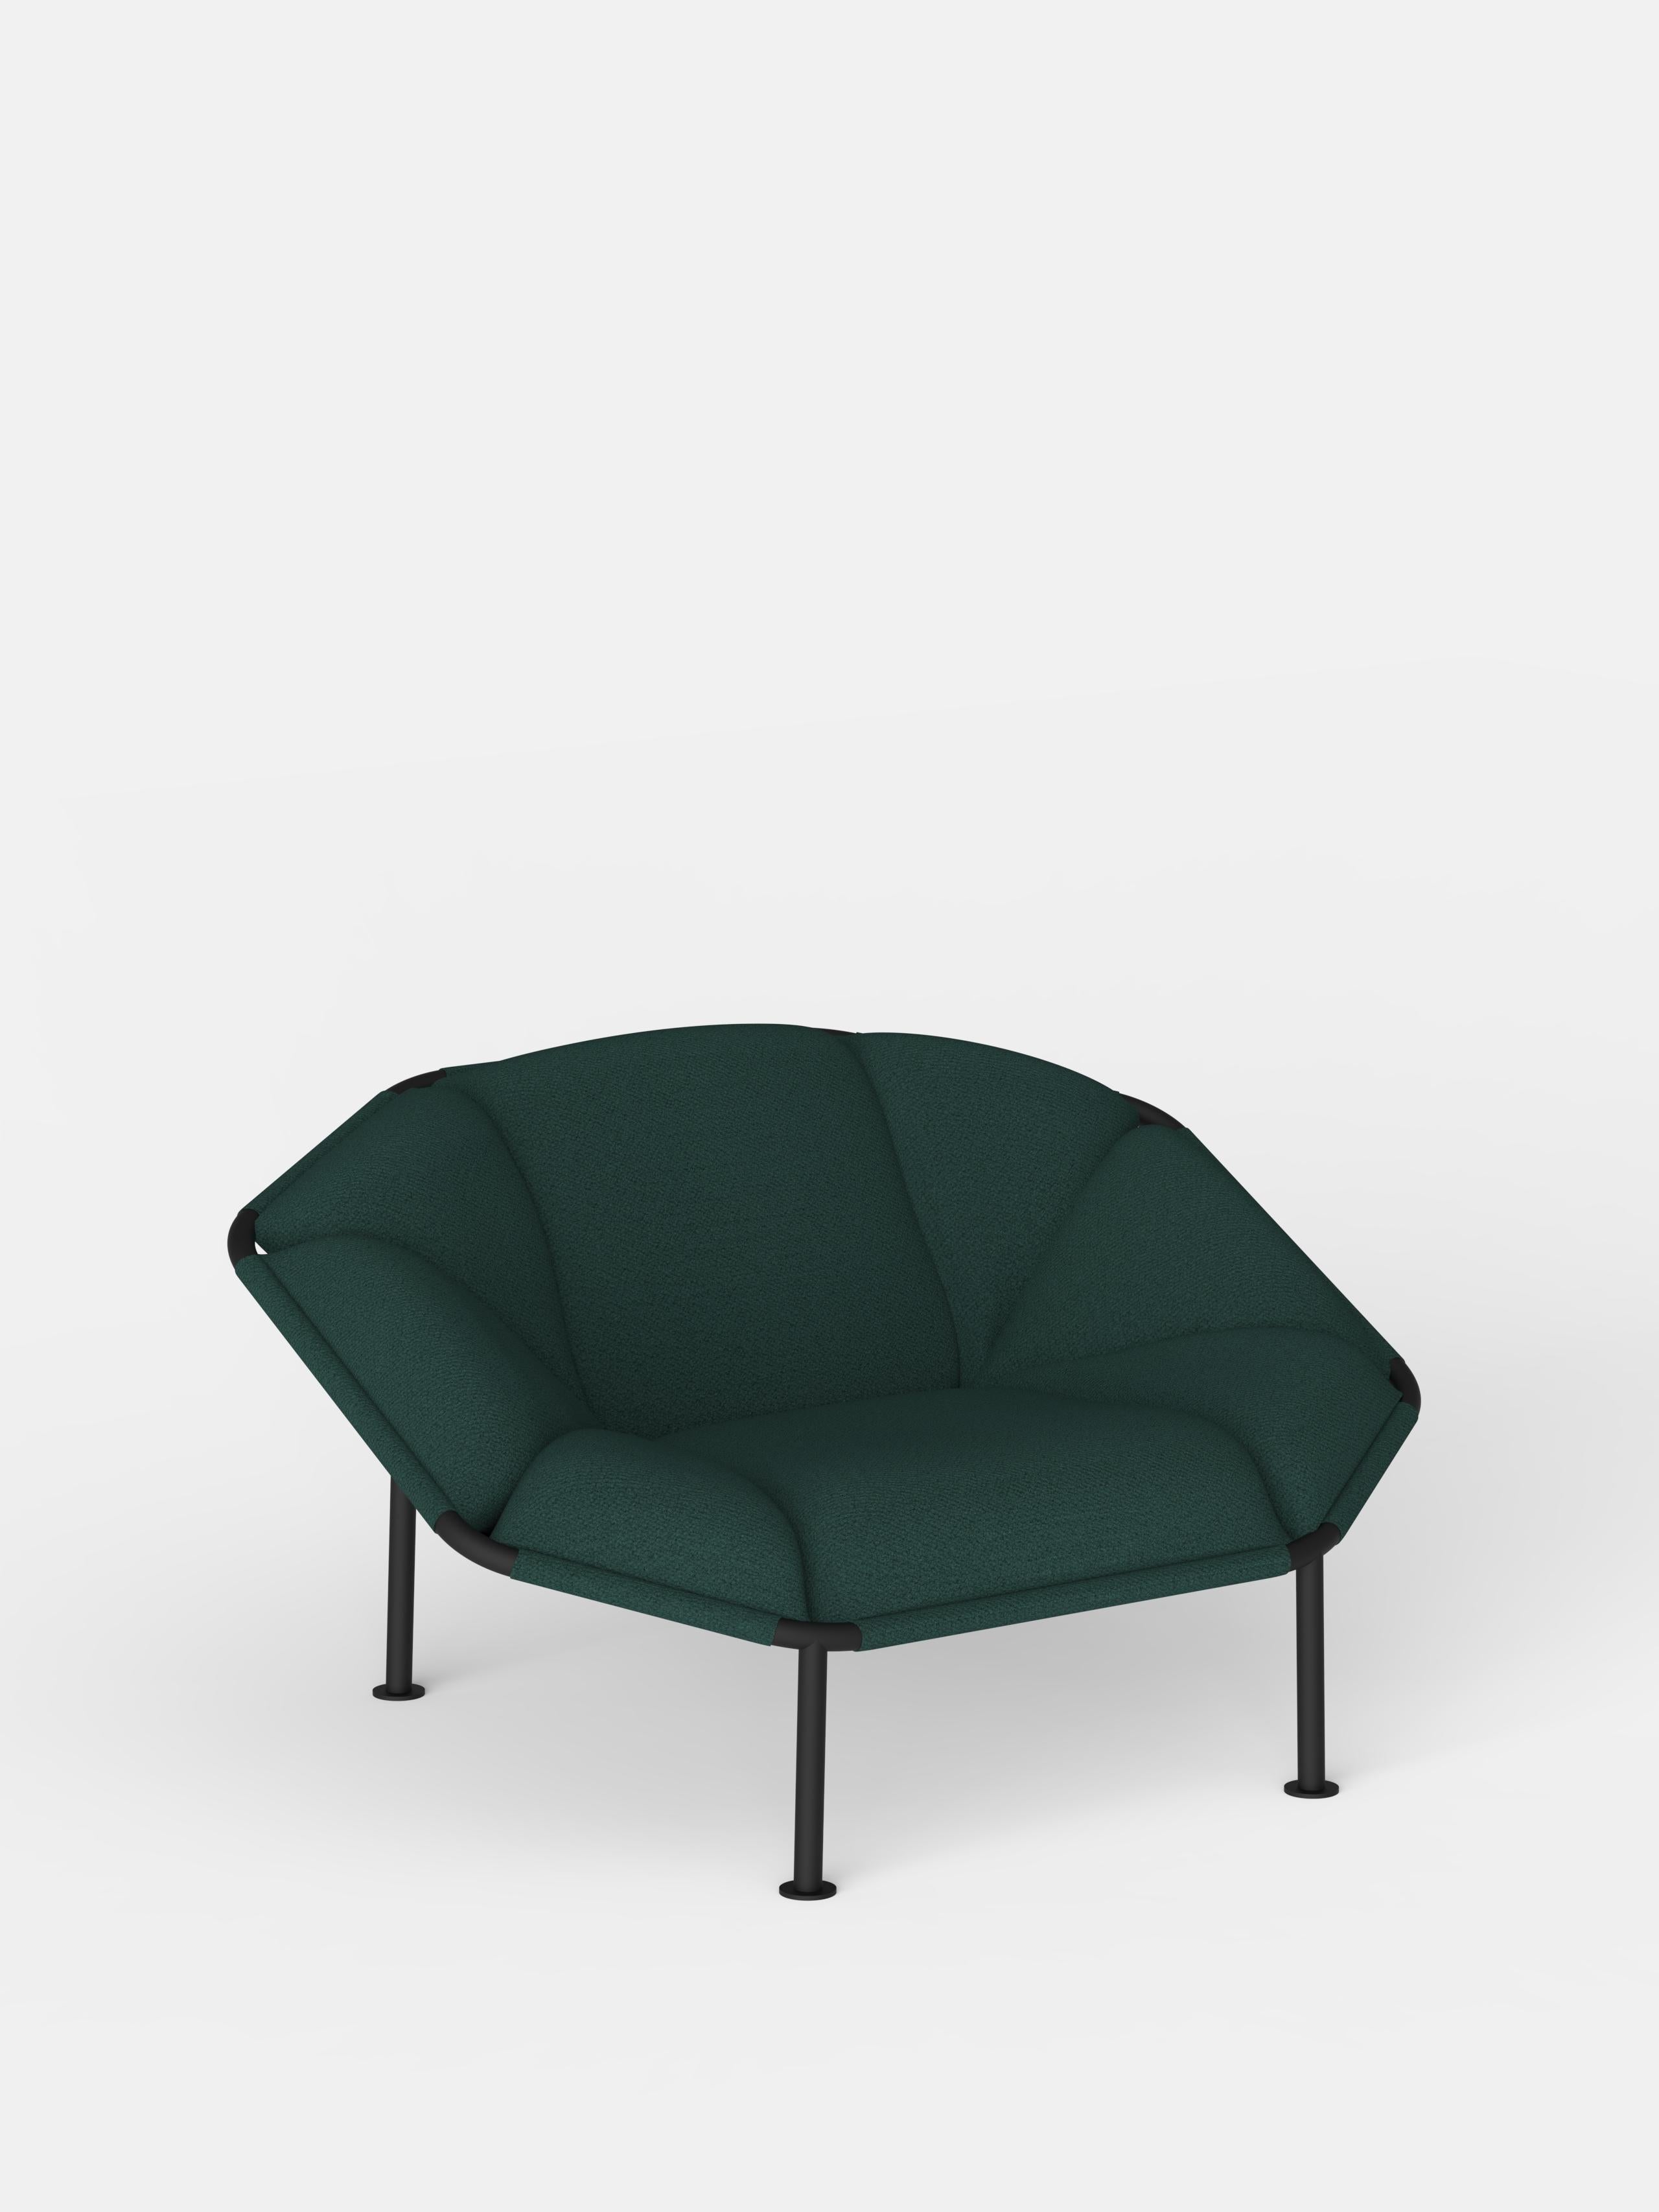 Atlas Armchair by Kann Design
Dimensions: D 94 x W 128 x H 78 cm.
Materials: Powder coated steel, HR foam, fabric upholstery Kvadrat Vidar 1062 (94% wool, 6% nylon).
Available in other fabrics.

Atlas is a collection of sofas and armchairs that